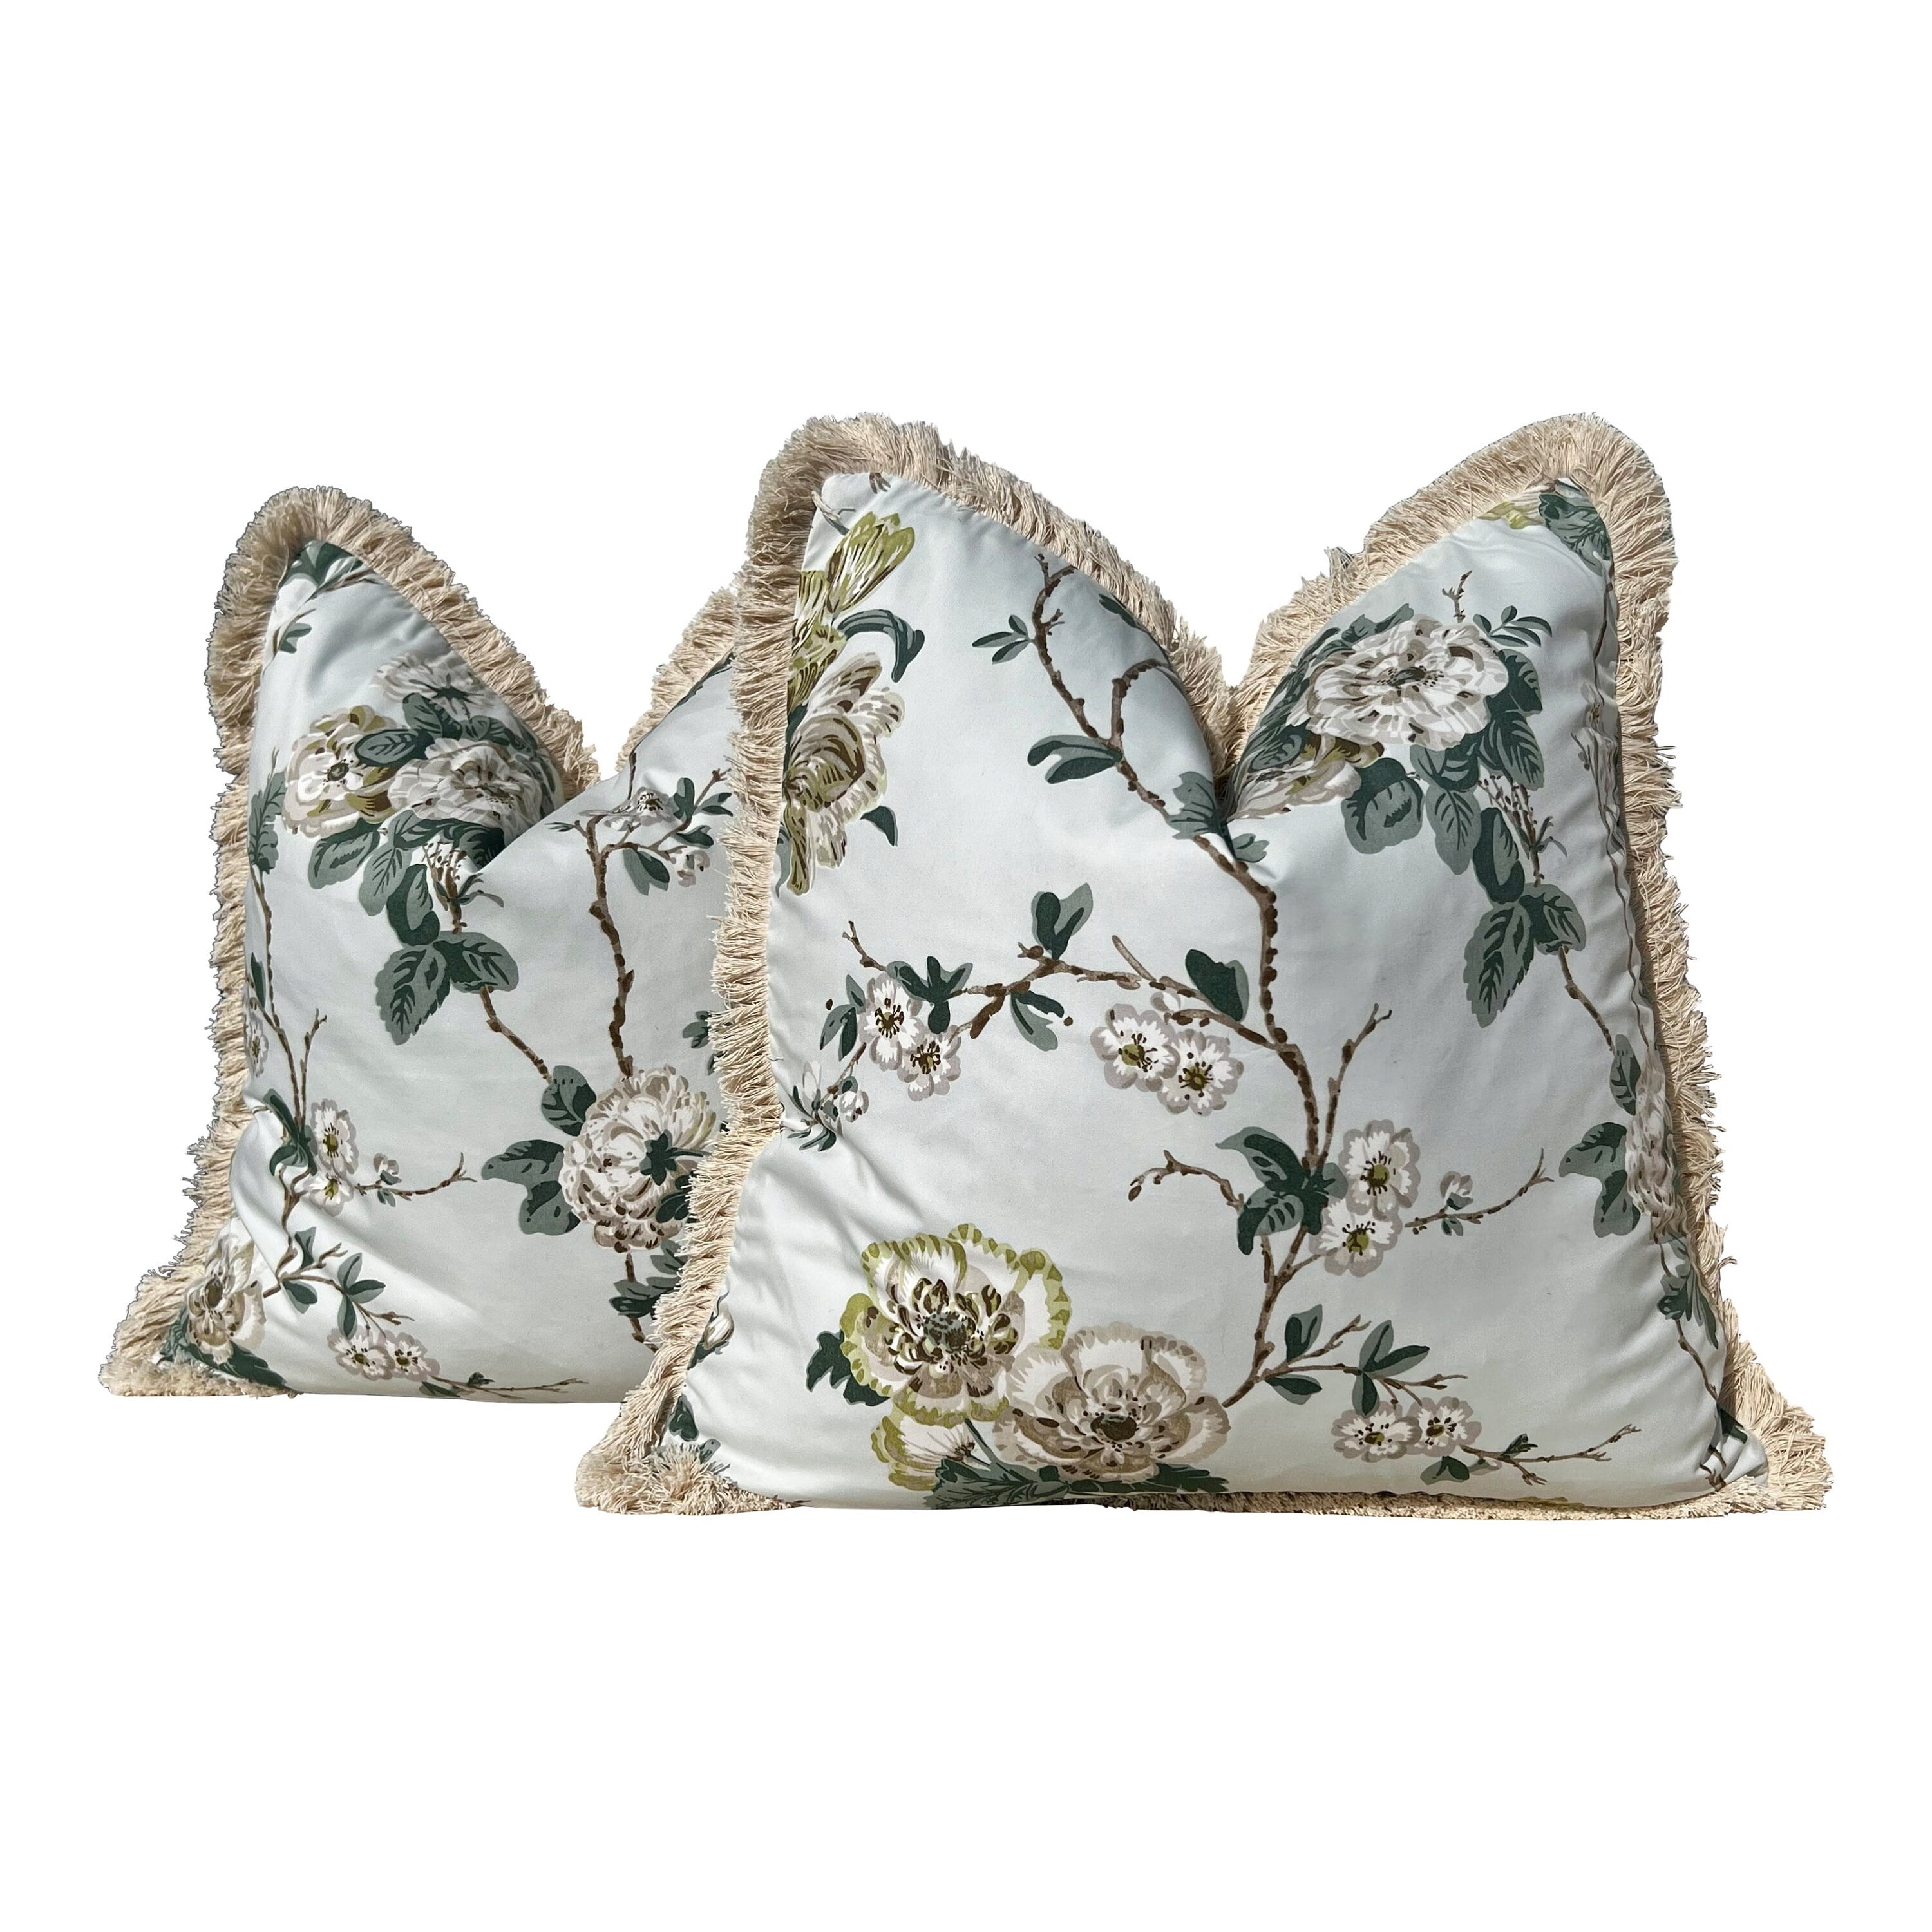 Schumacher Betty Chintz Pillow in Celadon Embellished with Beige Brush Trim. Decorative High End Pillows, Designer Floral Pillow Covers